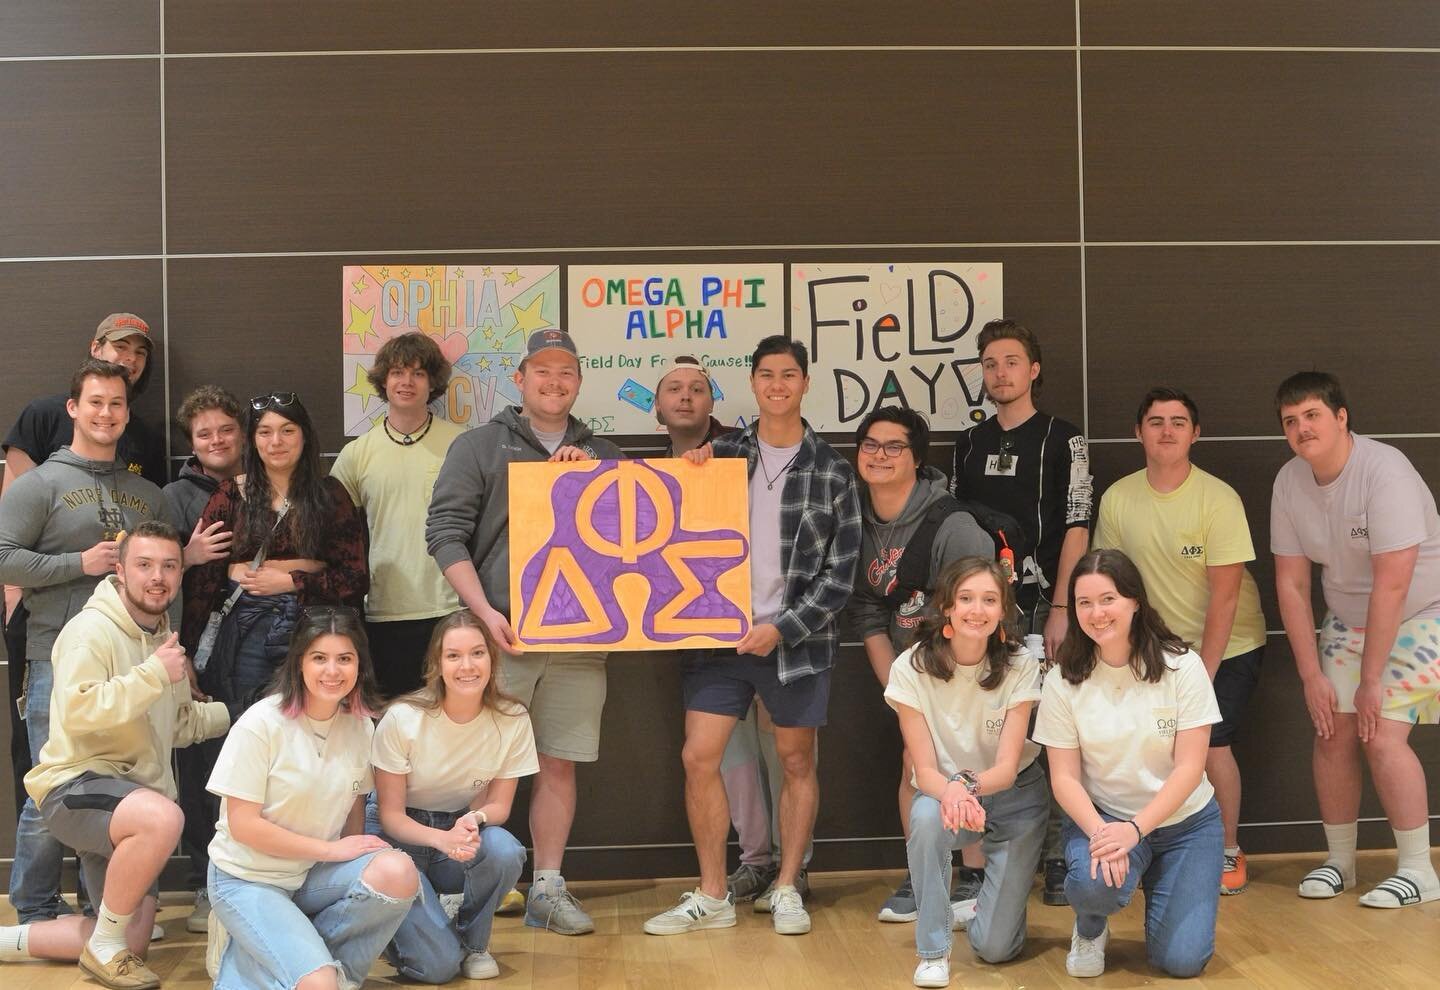 This past week we participated in Field Day for a Cause. Orchestrated by Omega Phi Alpha, we raised money throughout the week to help support the Autism Society of Central Virginia. Thank you to everyone at OPhiA for having us, we had a great time!